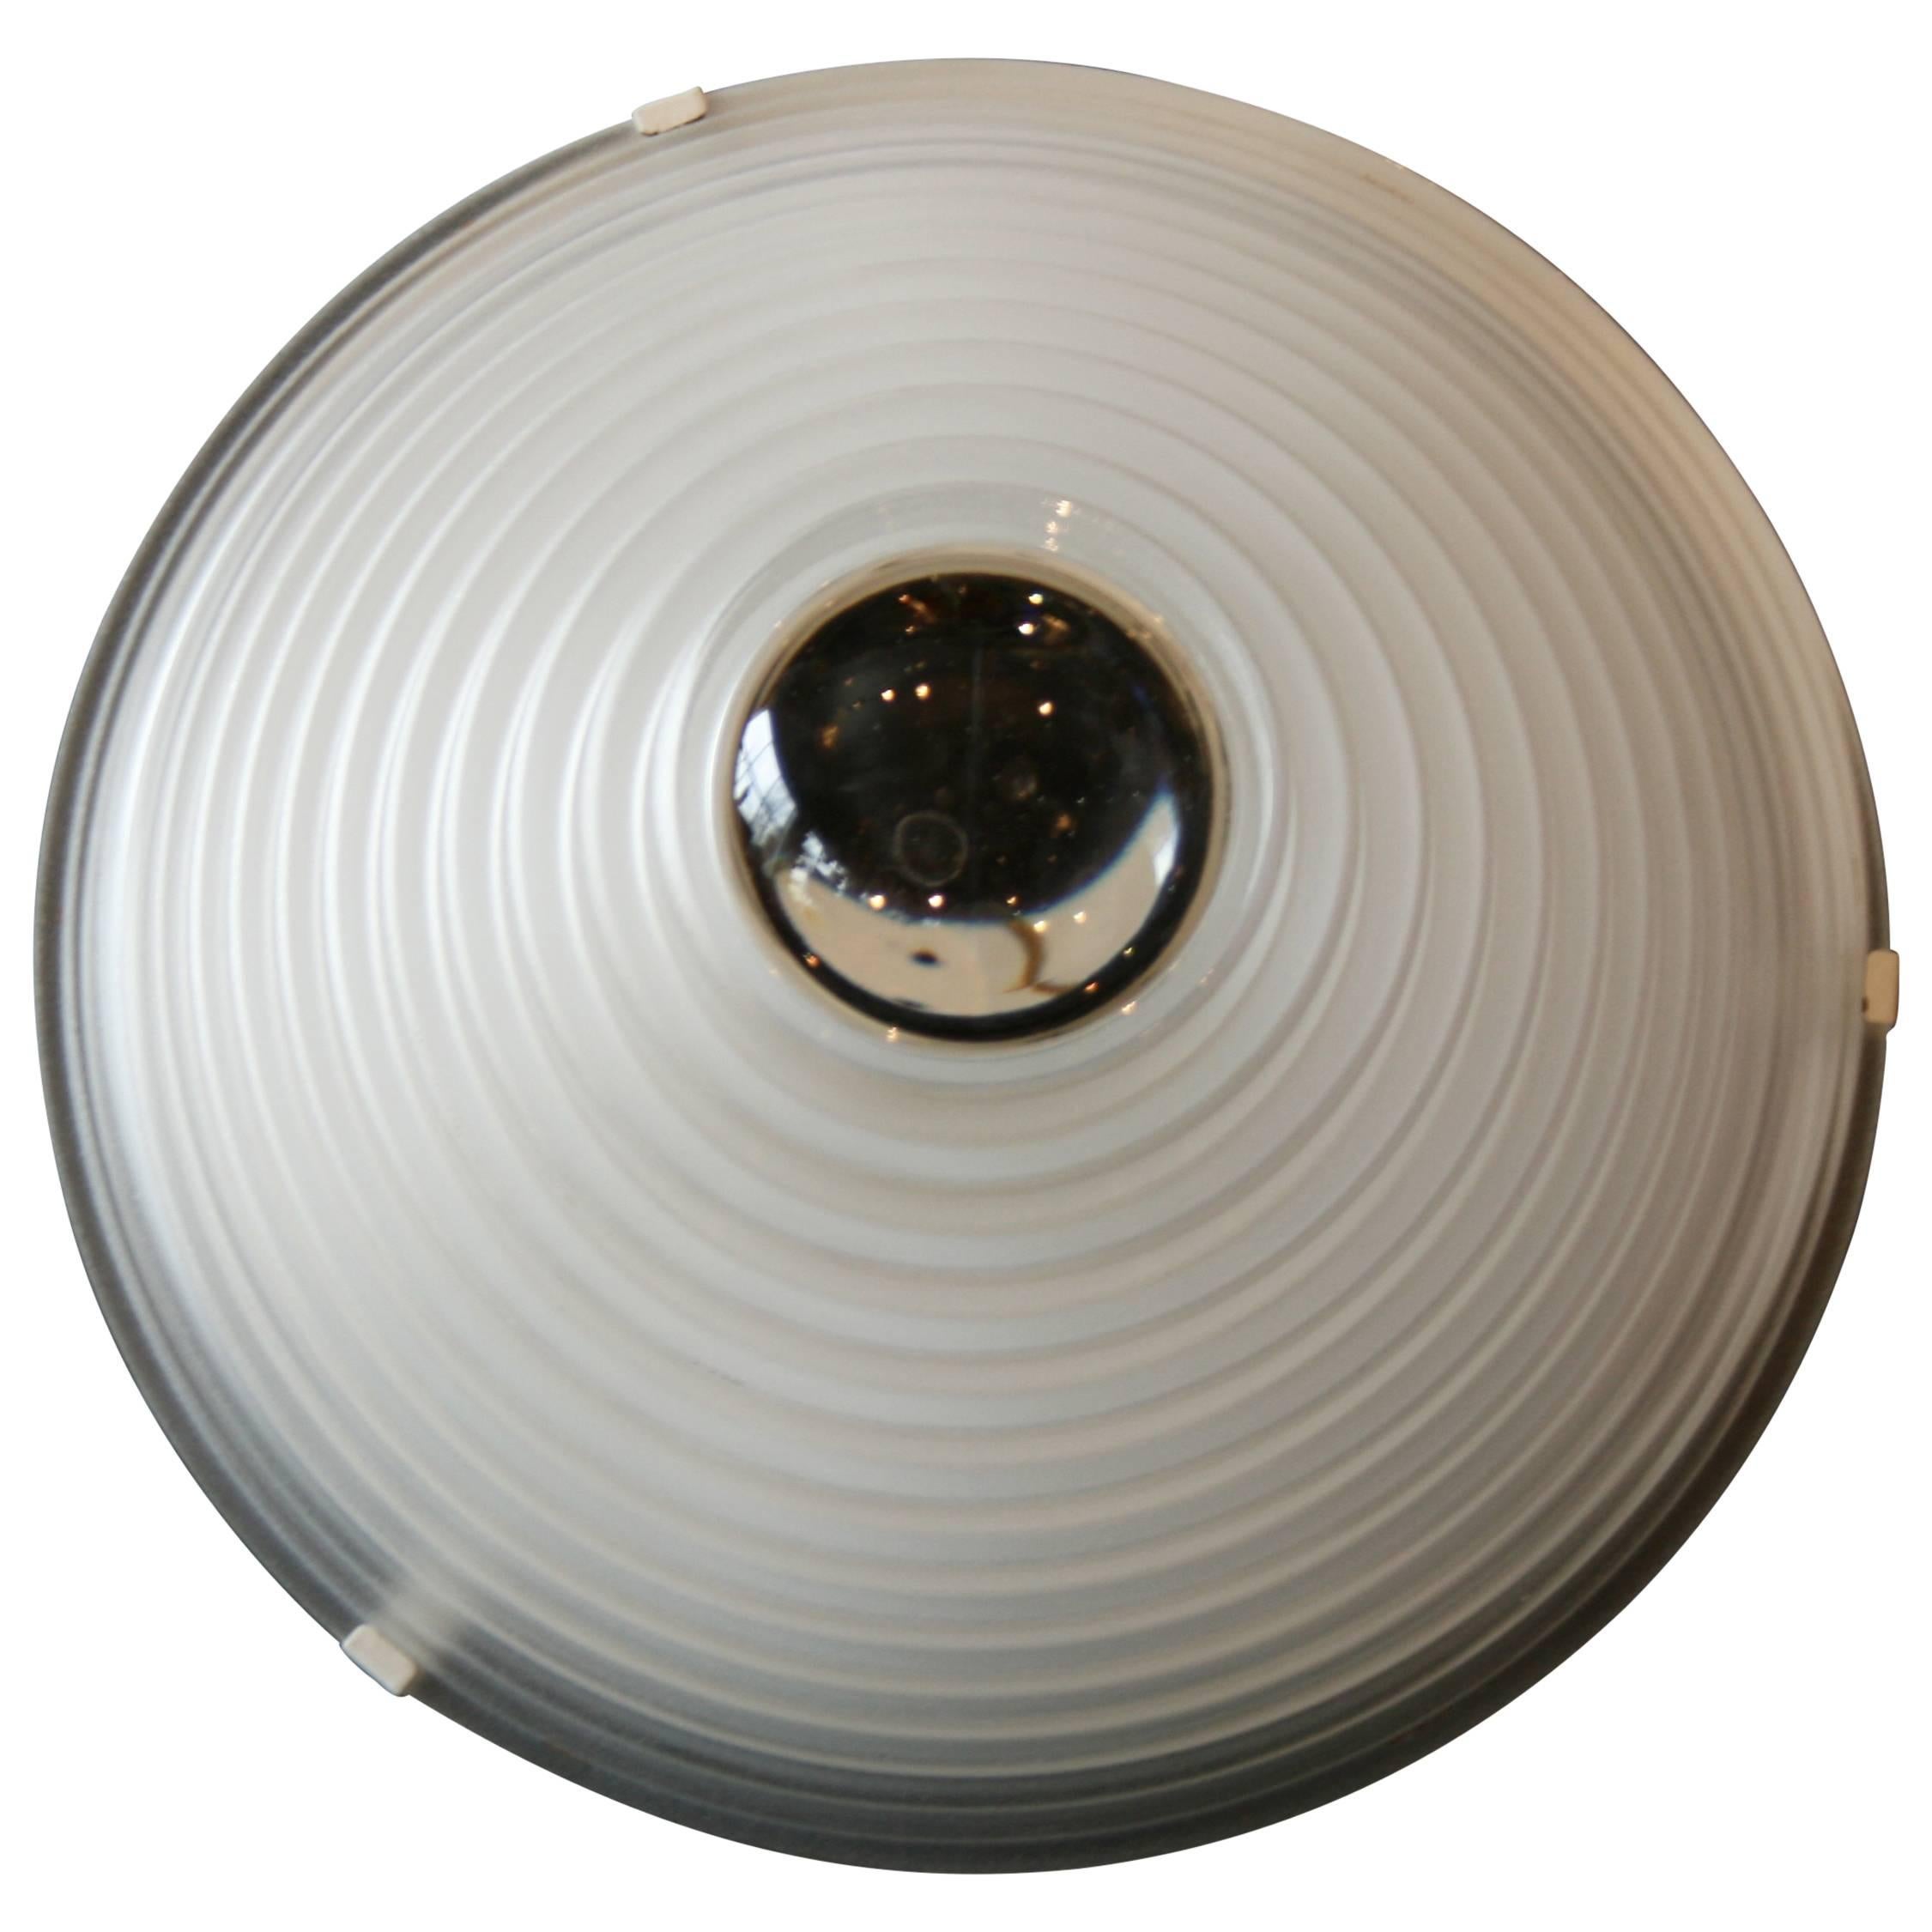 Impressive tiered glass round ceiling or wall light fixtures featuring a convex lens glass and graduating tiered; these can be ceiling mounted, wall-mounted or hang as pendants from wire or chain. Four items available.
Avantgarden Ltd. cultivates